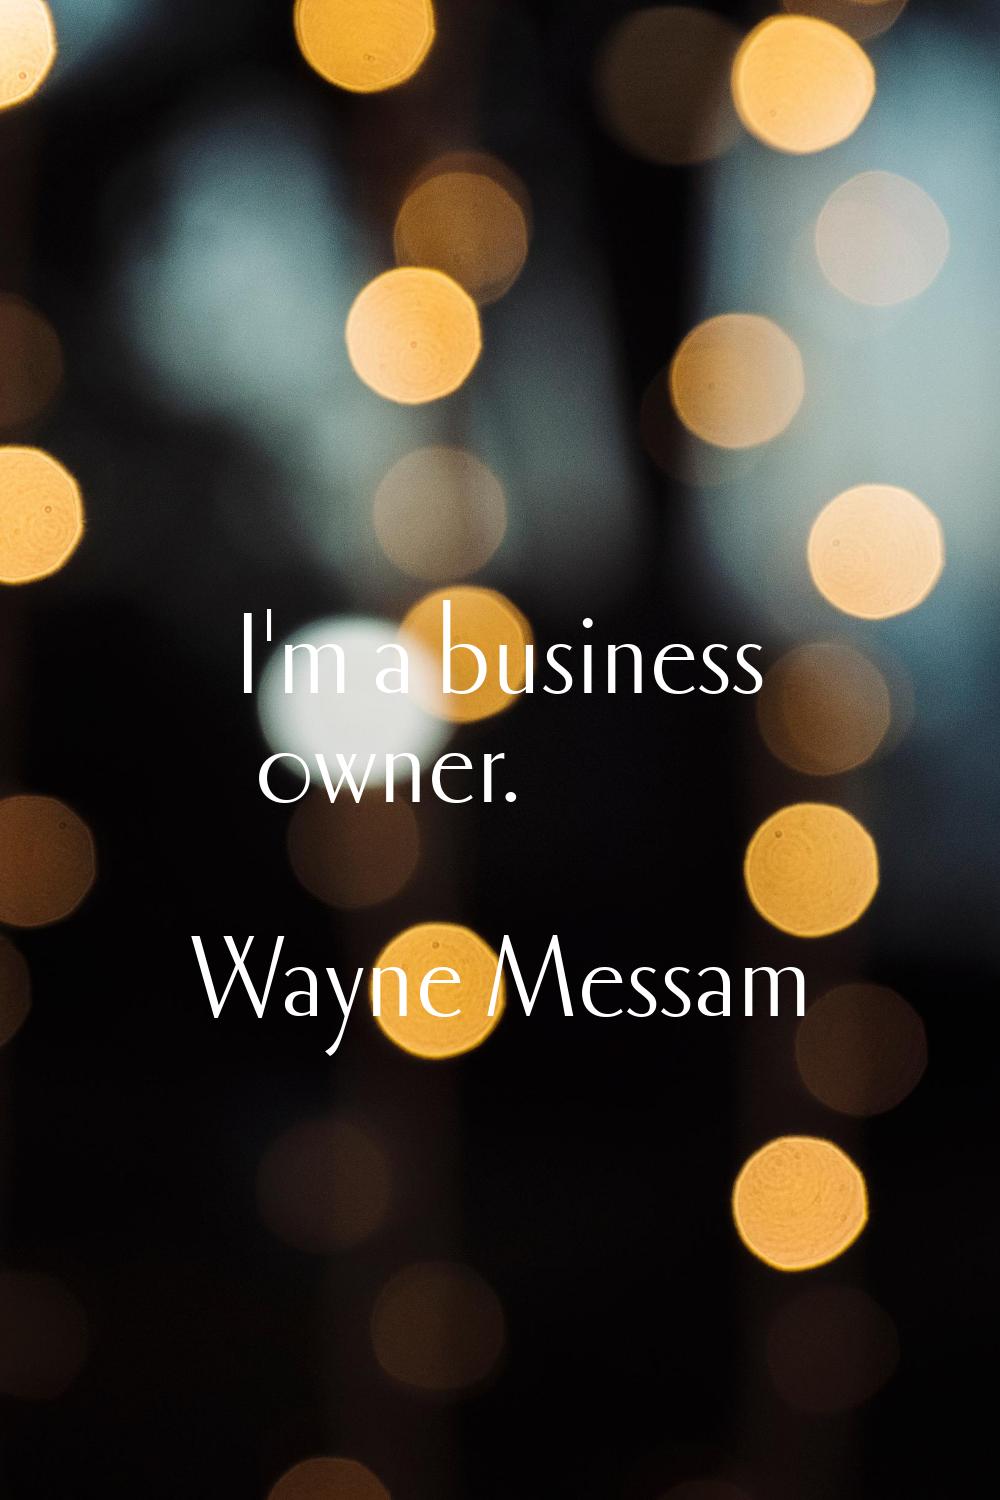 I'm a business owner.